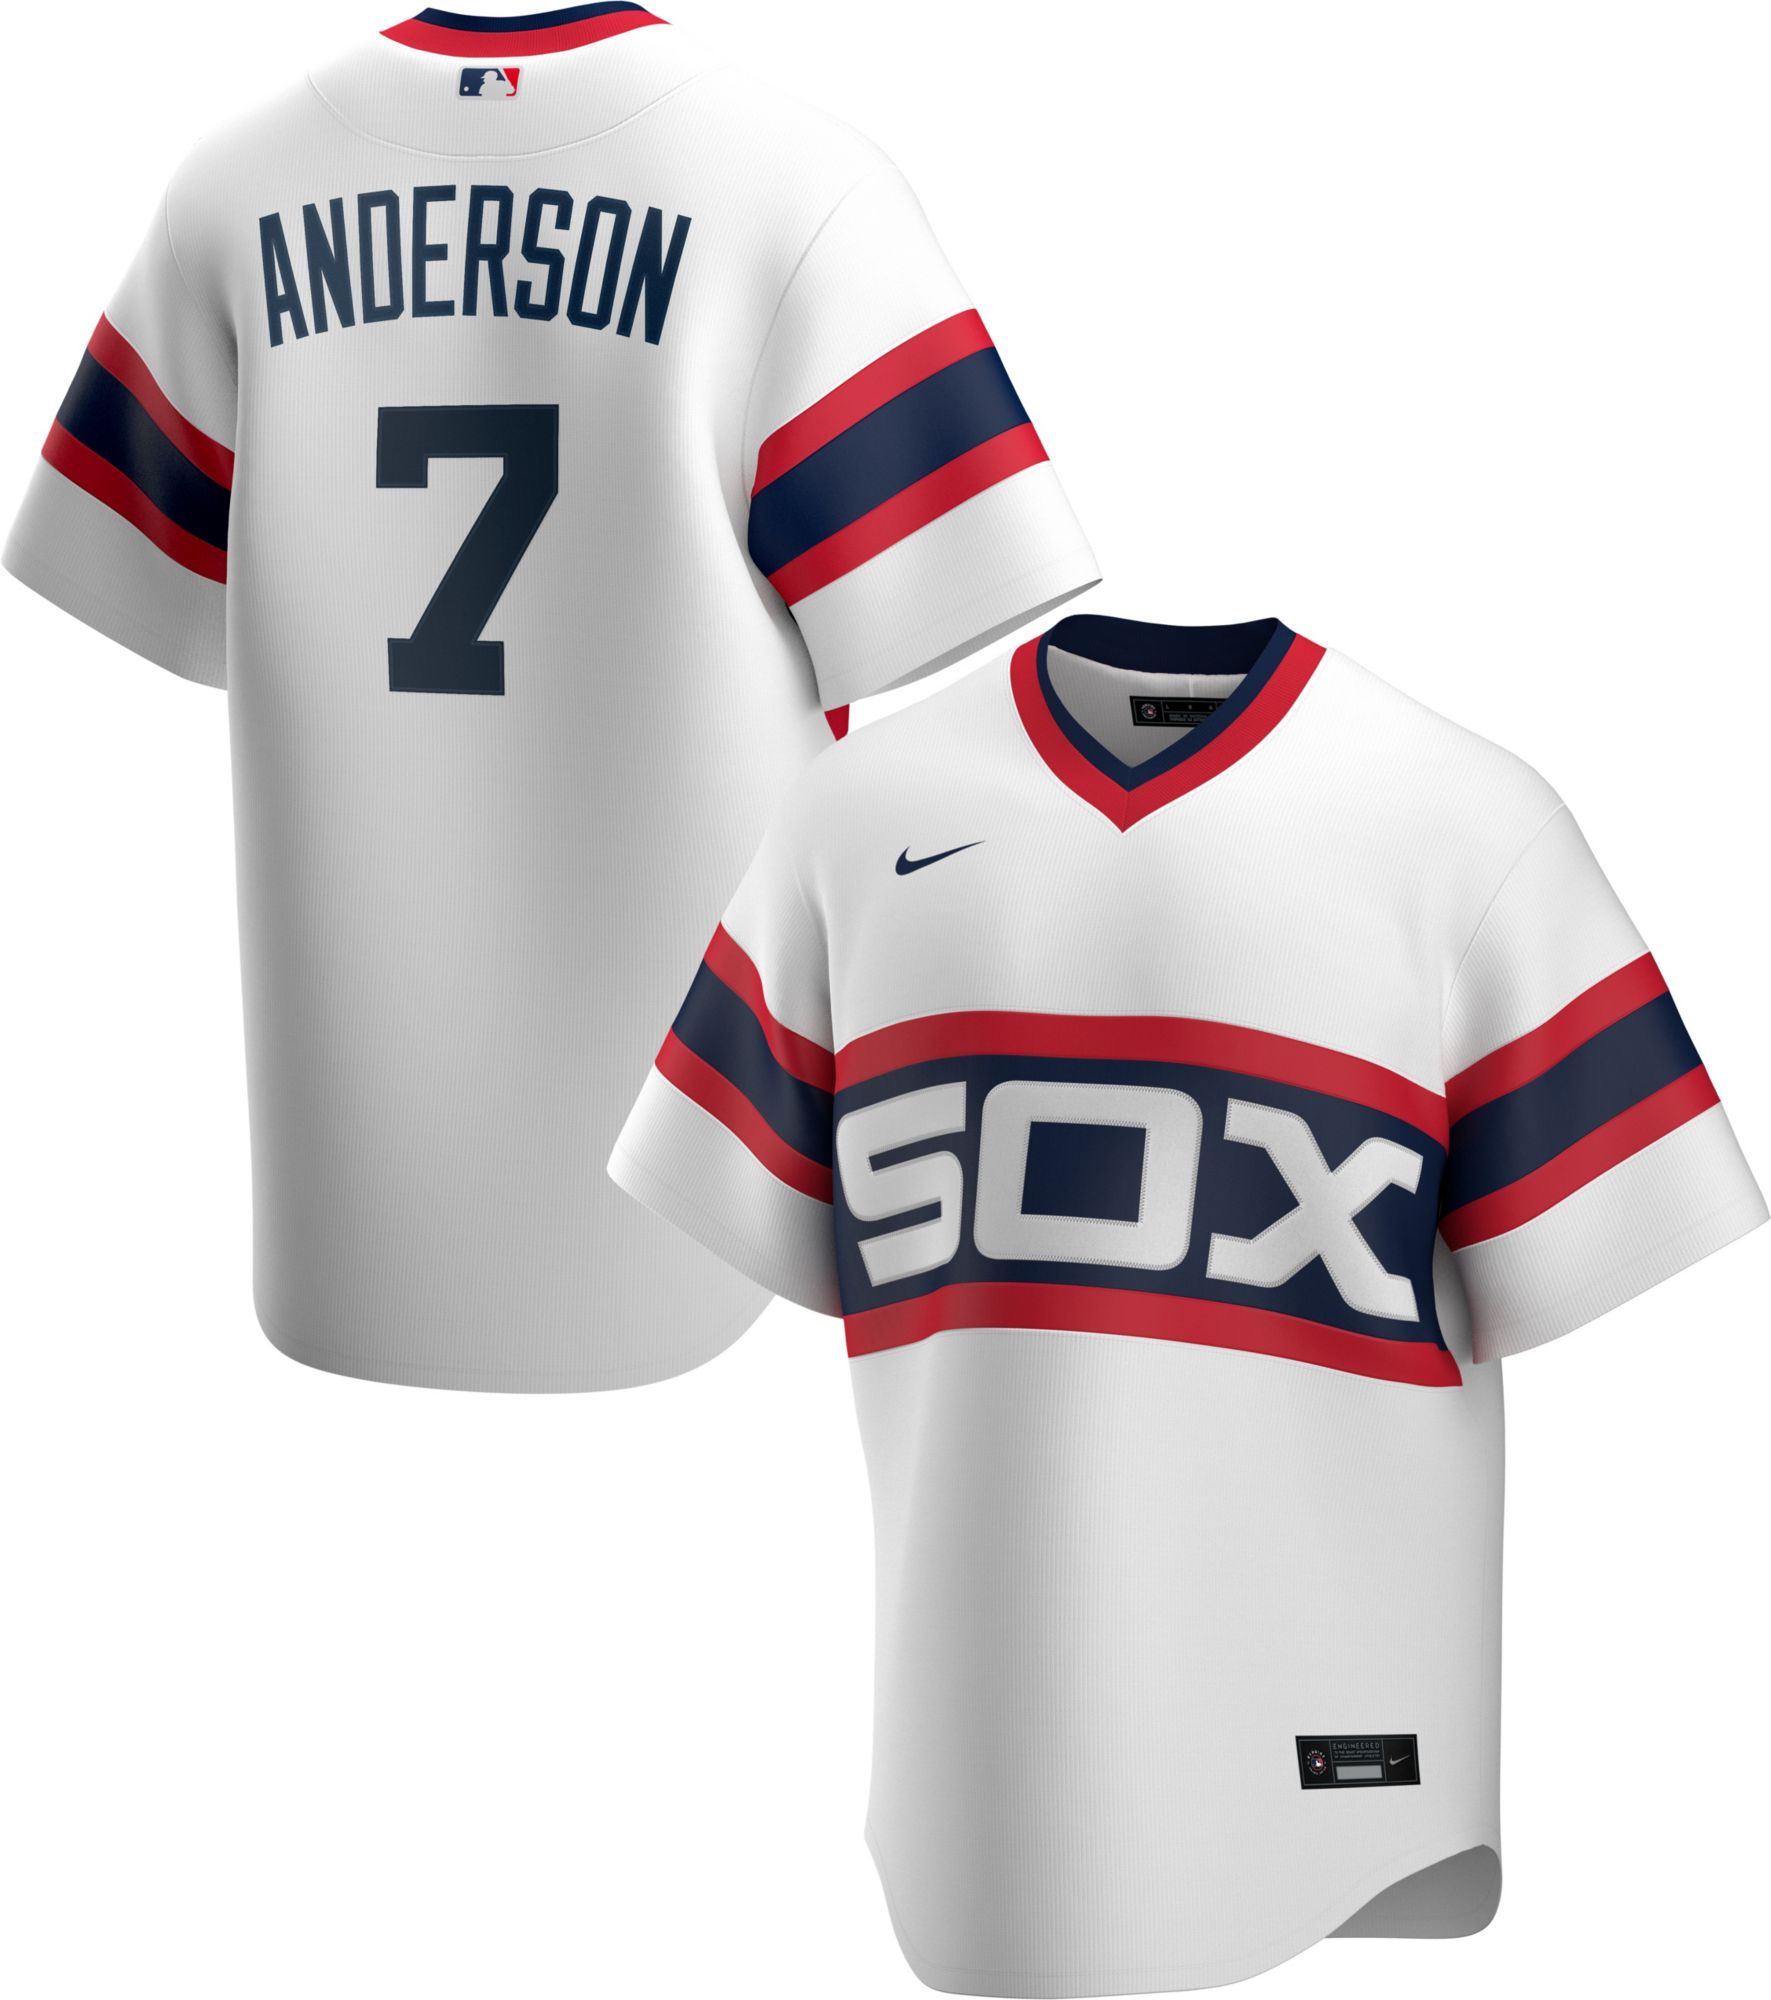 white sox anderson jersey